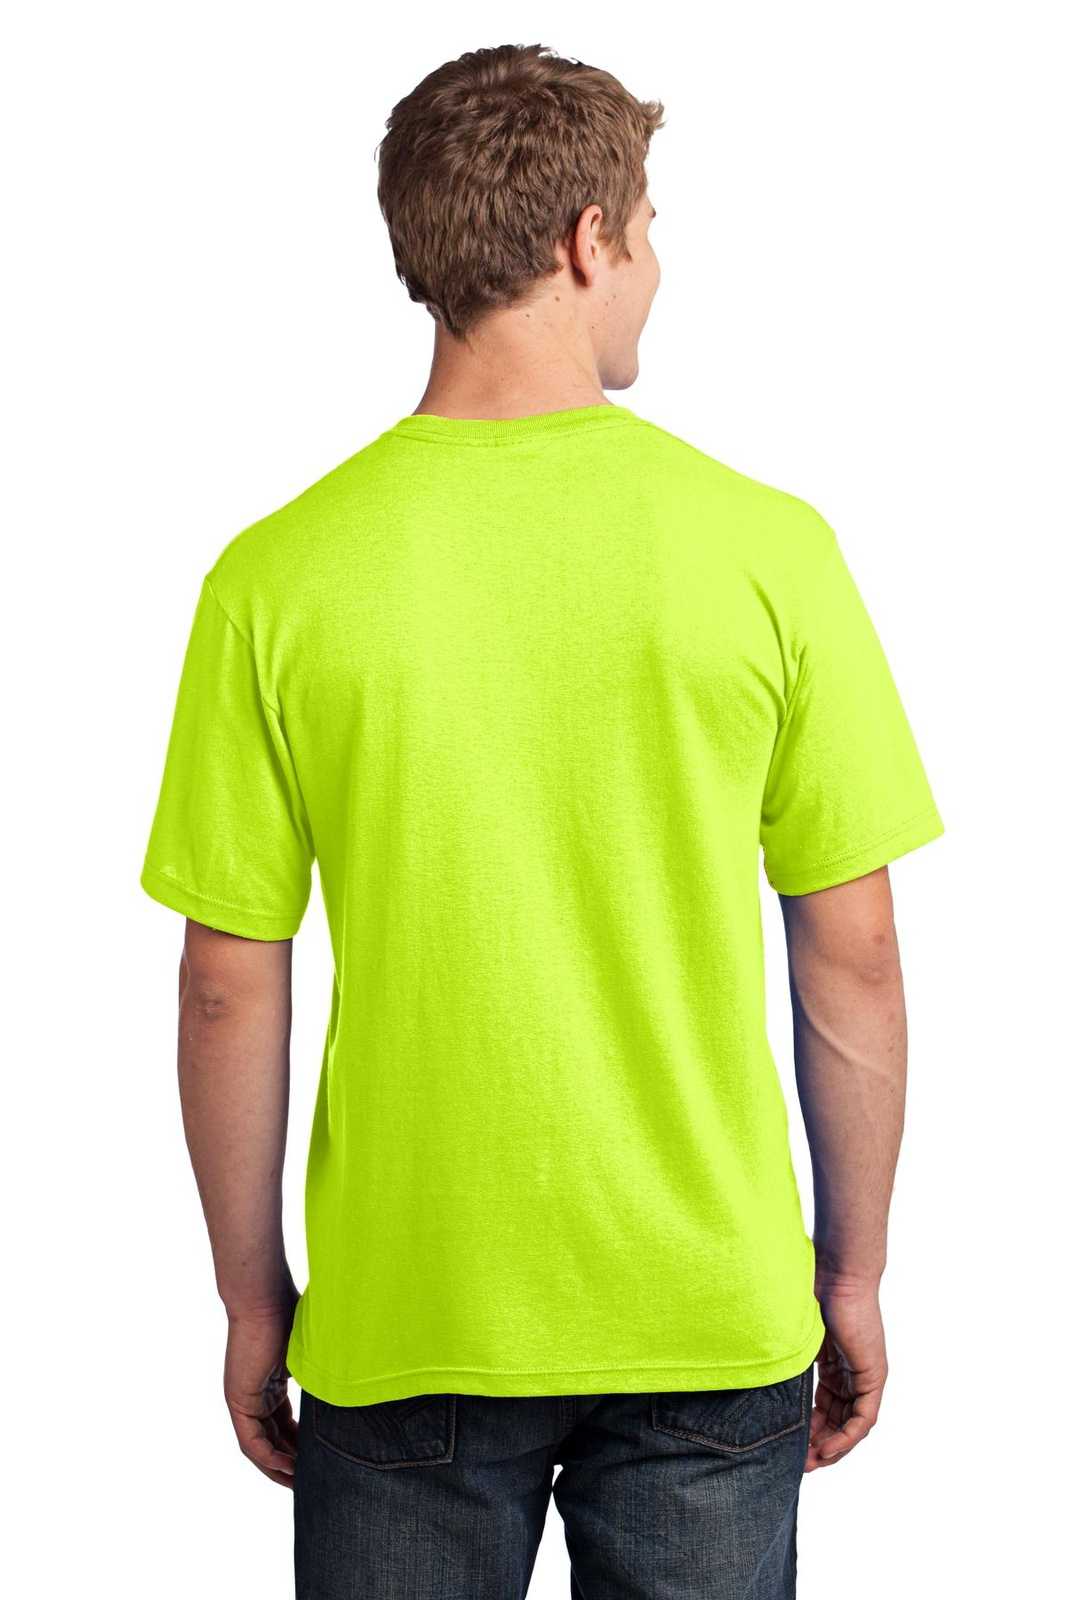 Port & Company USA100P All-American Pocket Tee - Safety Green - HIT a Double - 1